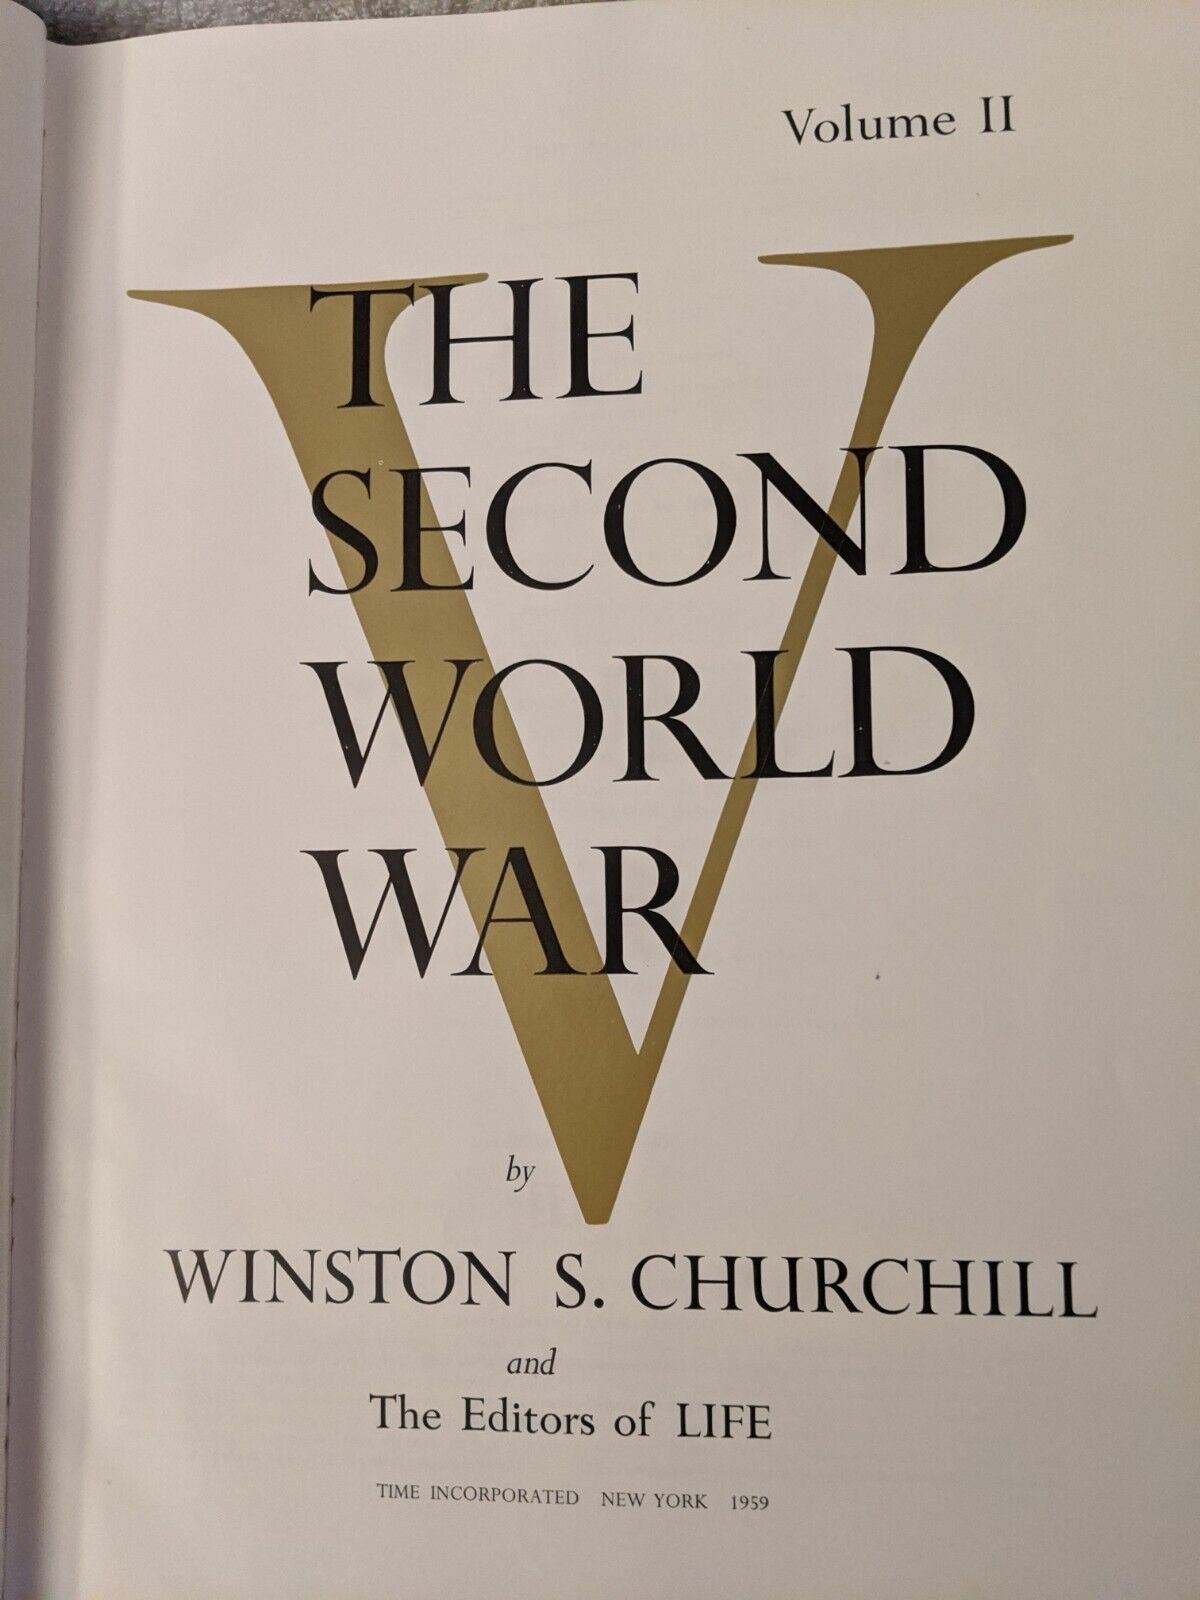 The Second World War Volumes 1 & 2, Time Inc. NY 1959 By Winston Churchill 